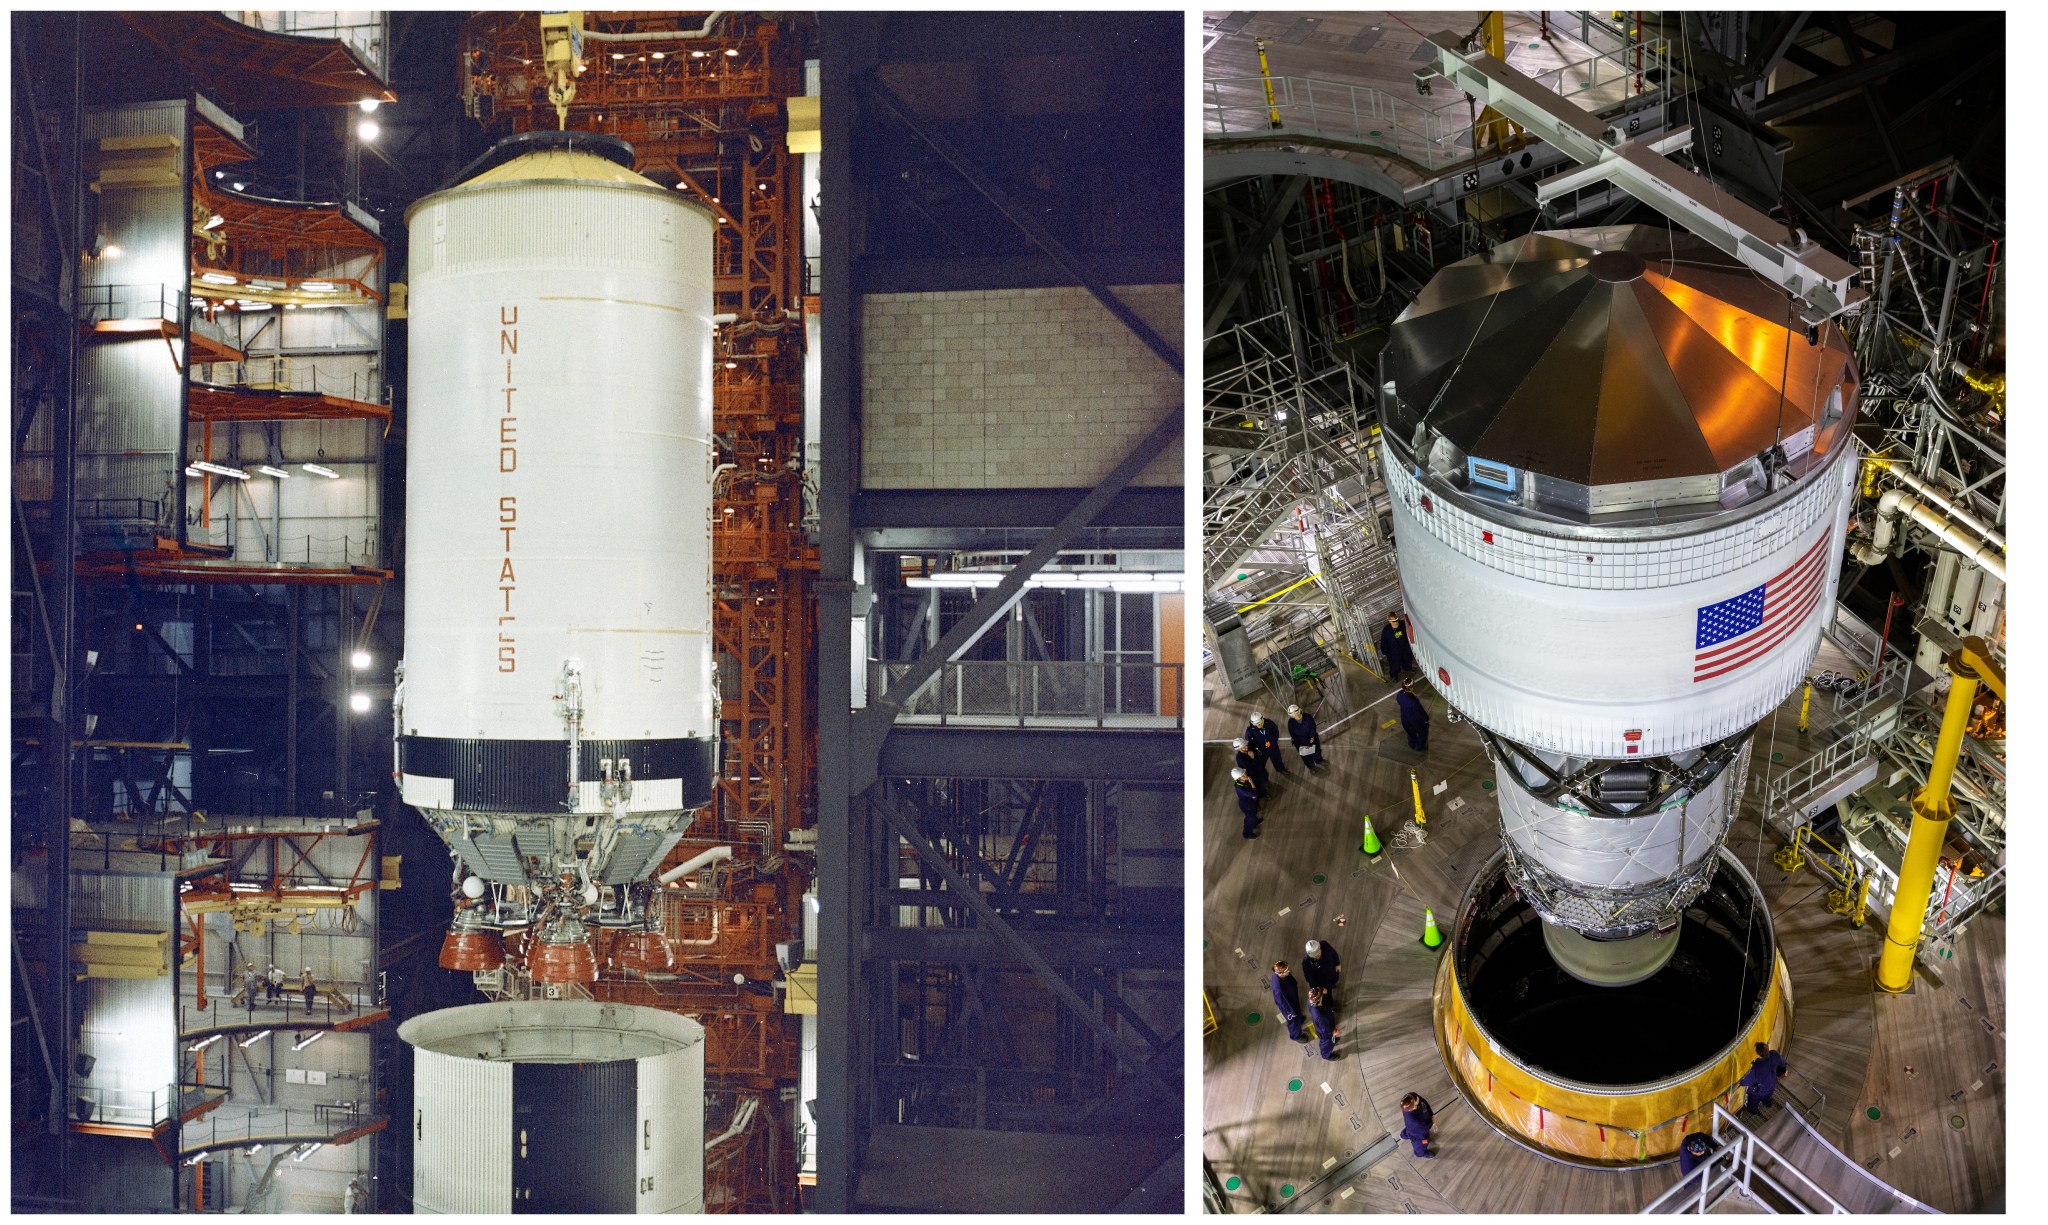 A side-by-side comparison of the second stage of the Saturn V rocket getting stacked on top of the rocket's first stage during the Apollo Program and stacking of the interim cryogenic propulsion stage for the Artemis Space Launch System rocket.